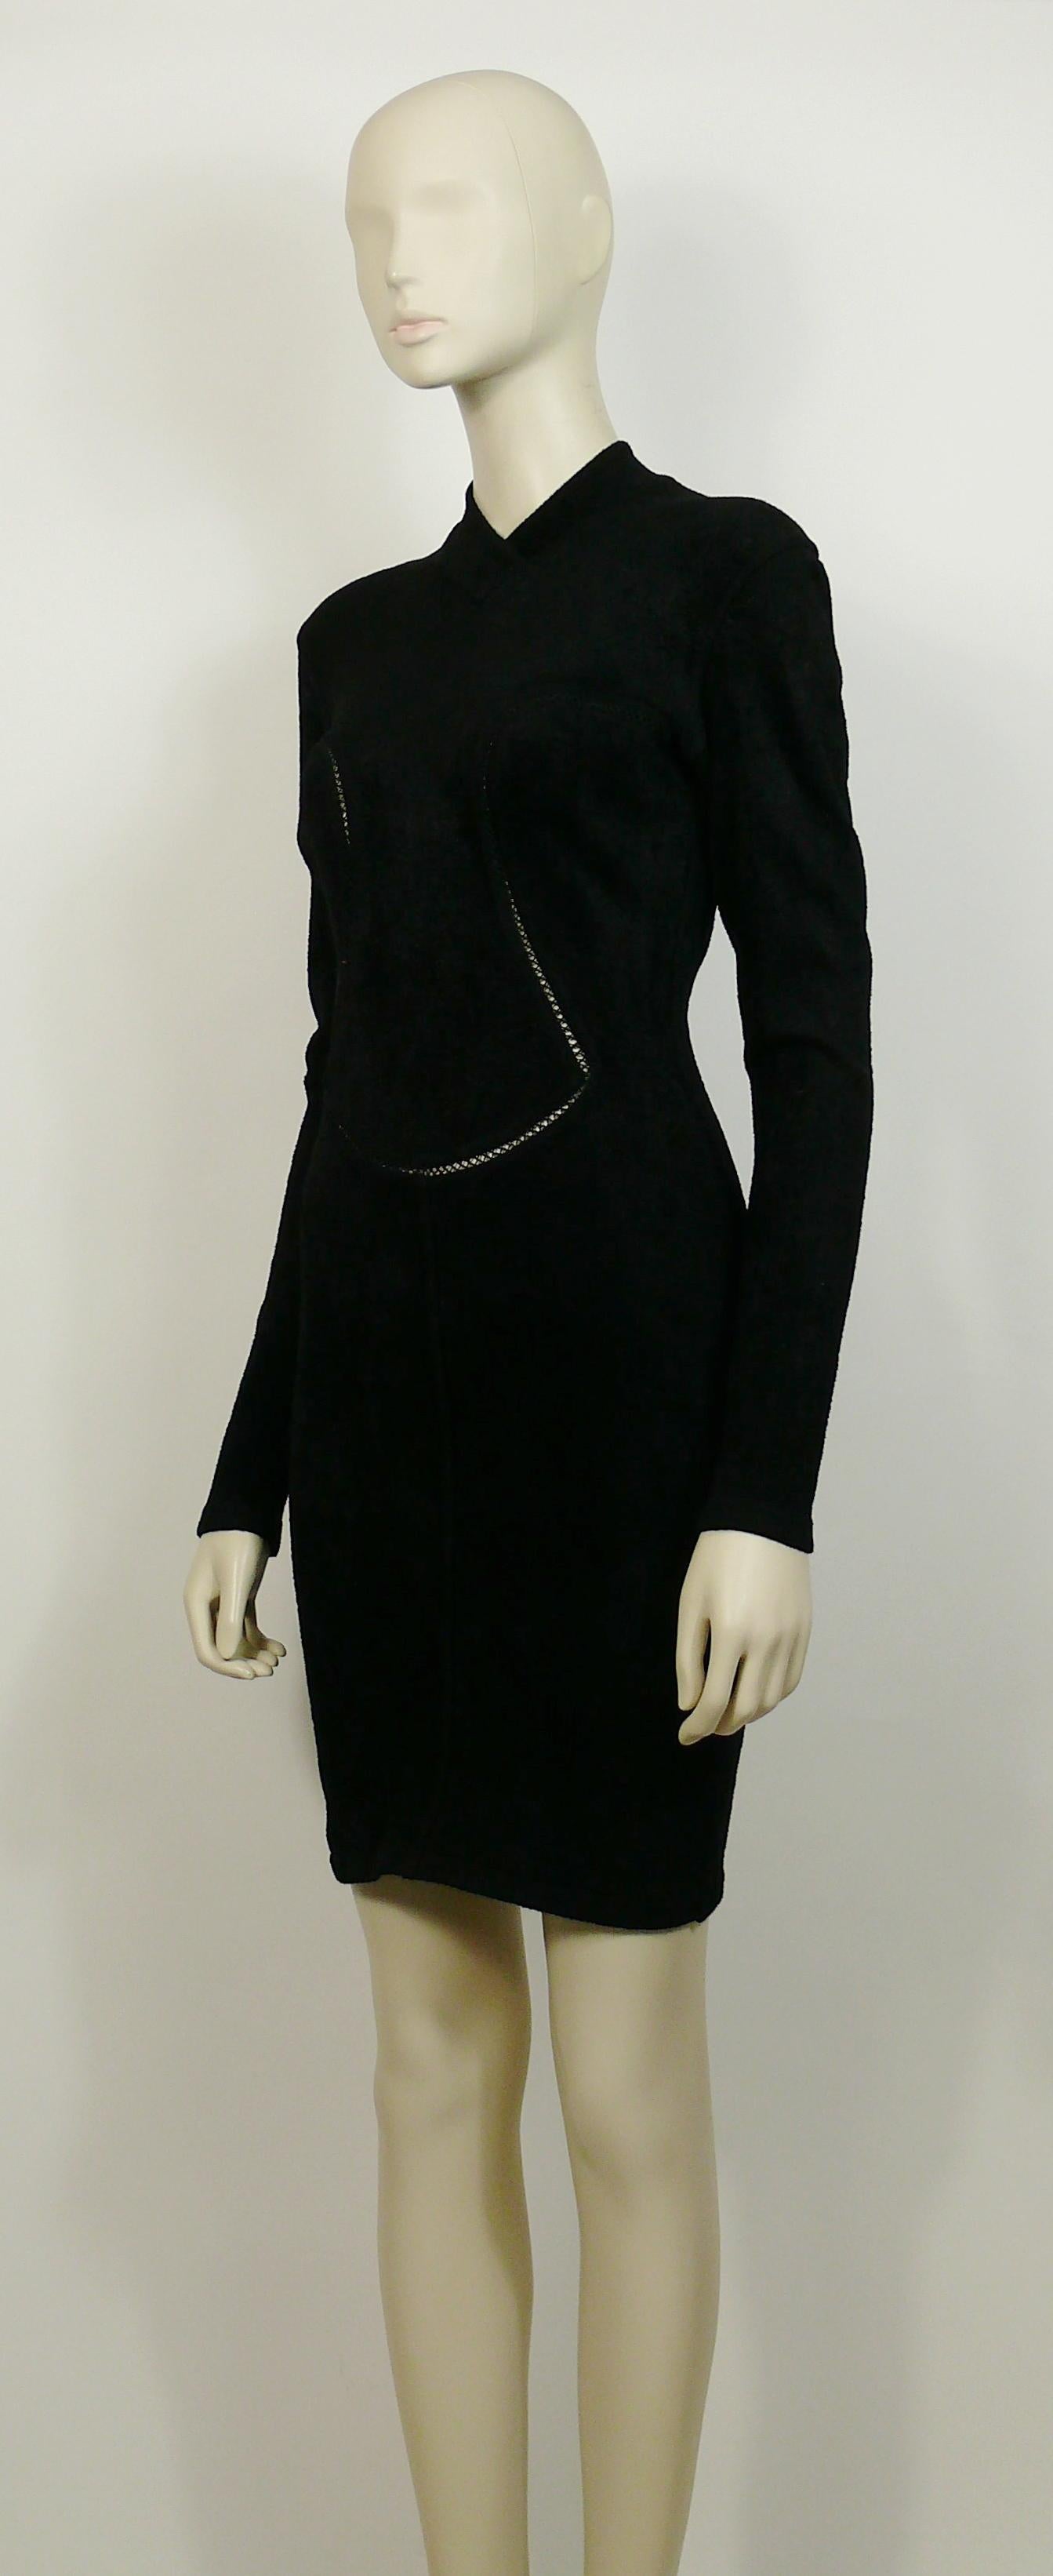 Azzedine Alaia Vintage Bodycon Knit Black Dress with Openwork Details F/W 1991 In Excellent Condition For Sale In Nice, FR